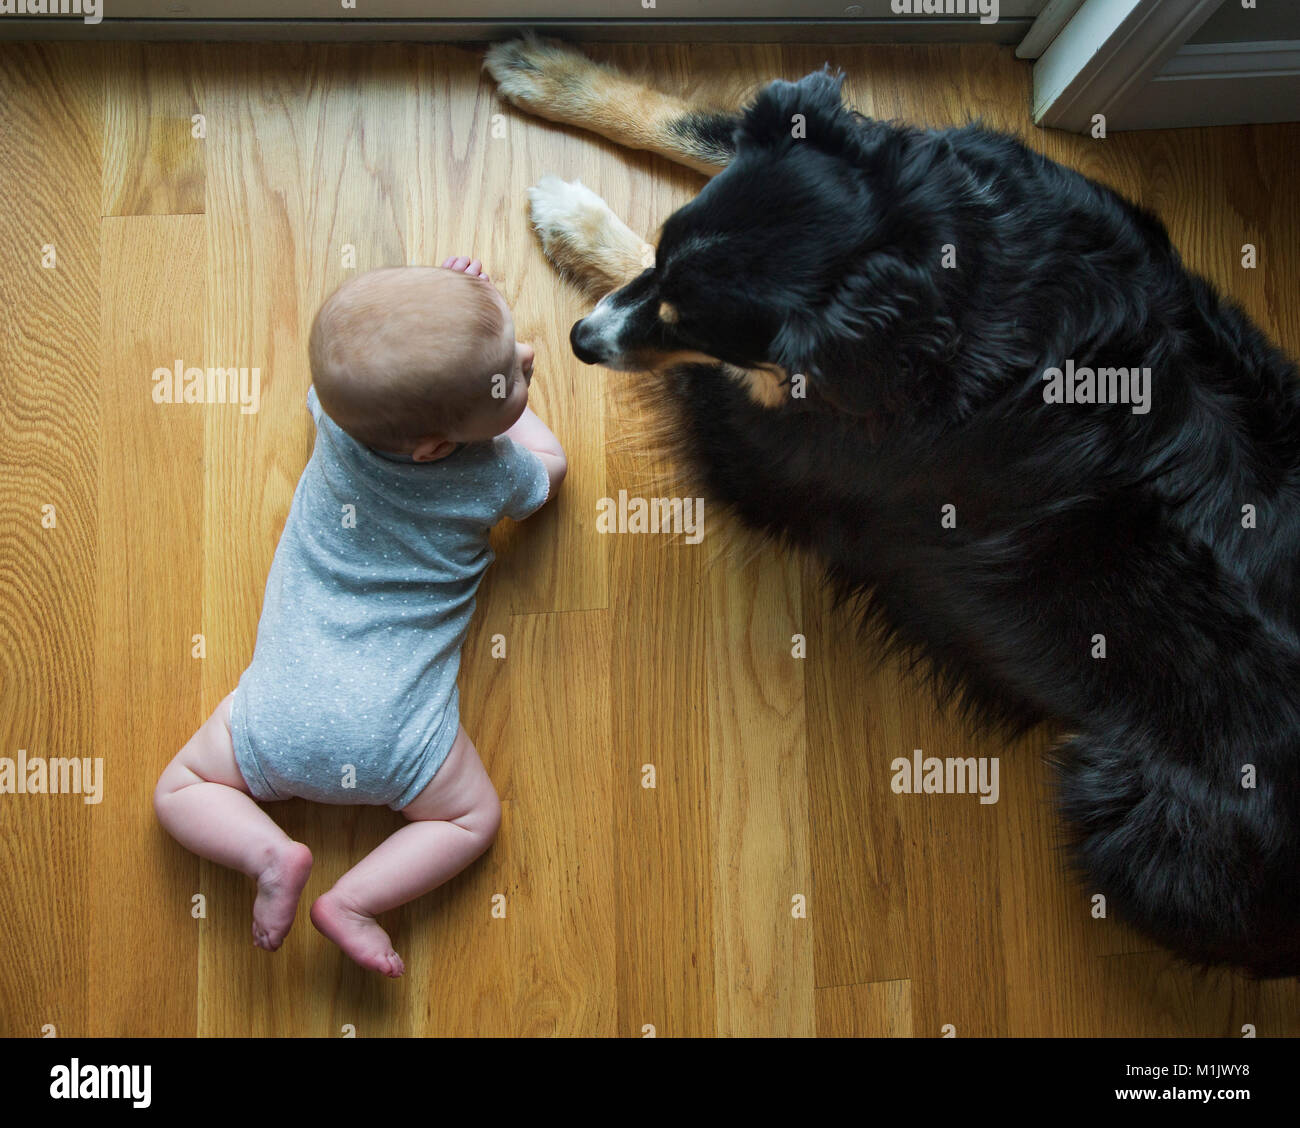 High Angle View of Baby and Dog Looking at Each Other while Laying on Wood Floor Stock Photo